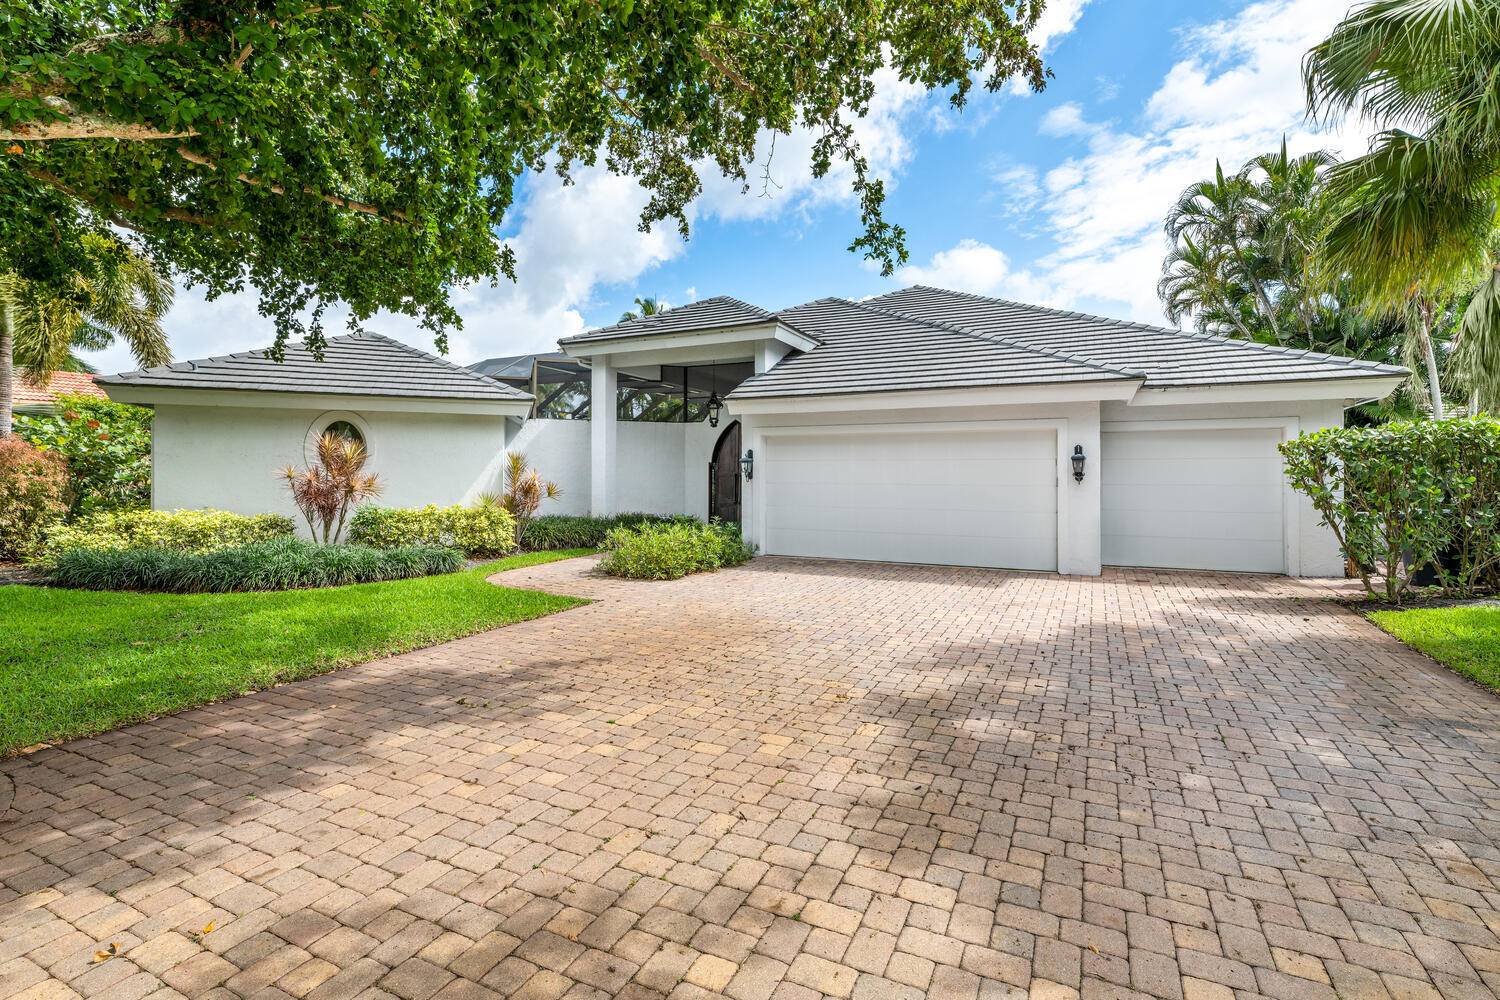 This exquisite waterfront home is located in the private golf community of Palm Beach Polo and offers a sprawling courtyard floorplan with a dramatic sanctuary like pool area.